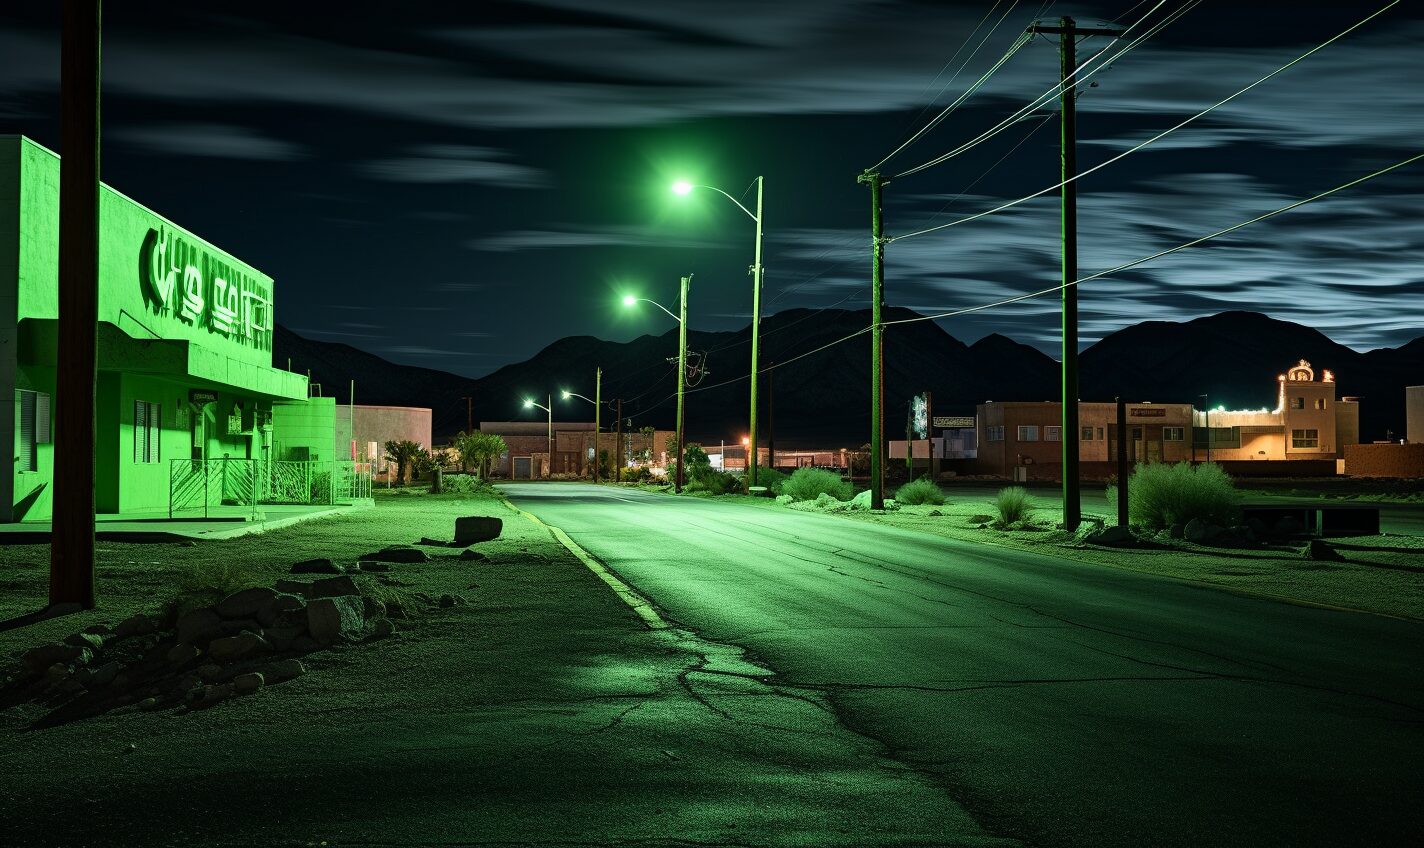 reno, nevada in a black and neon green glow